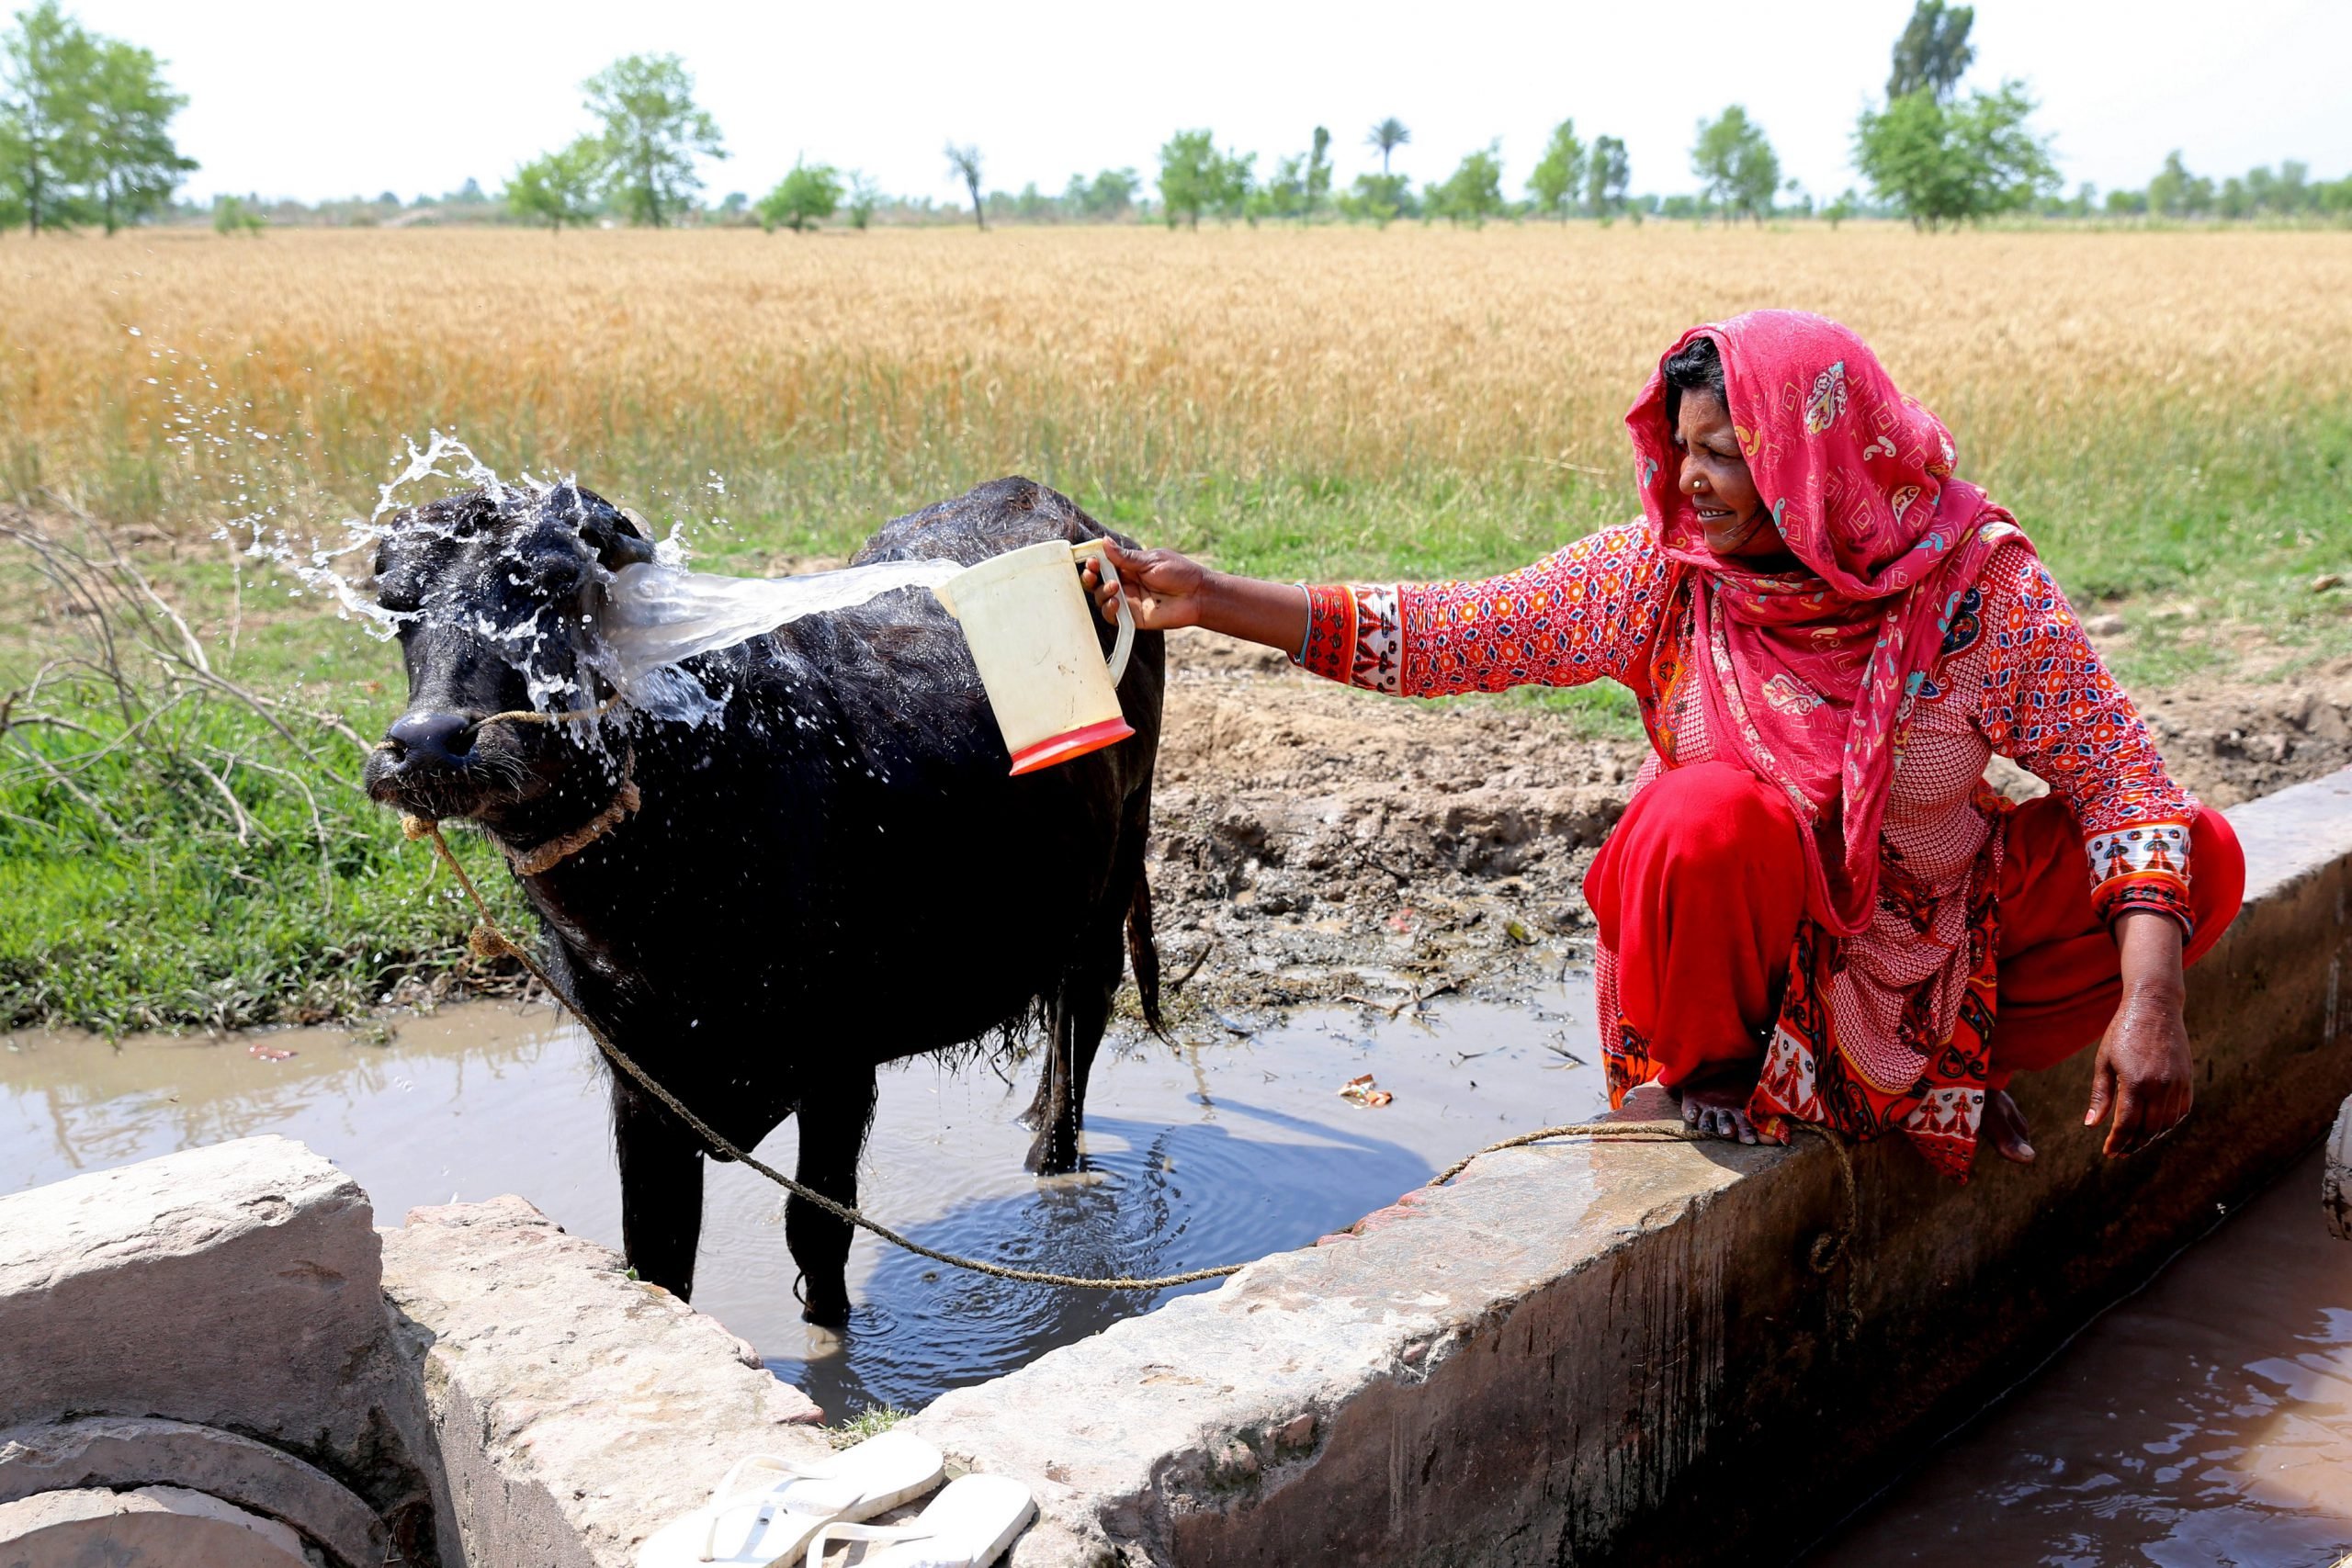 <p>A farmer washing her cow in the Christian dominated village of Khushpur, Punjab Province, Pakistan [image: Alamy]</p>